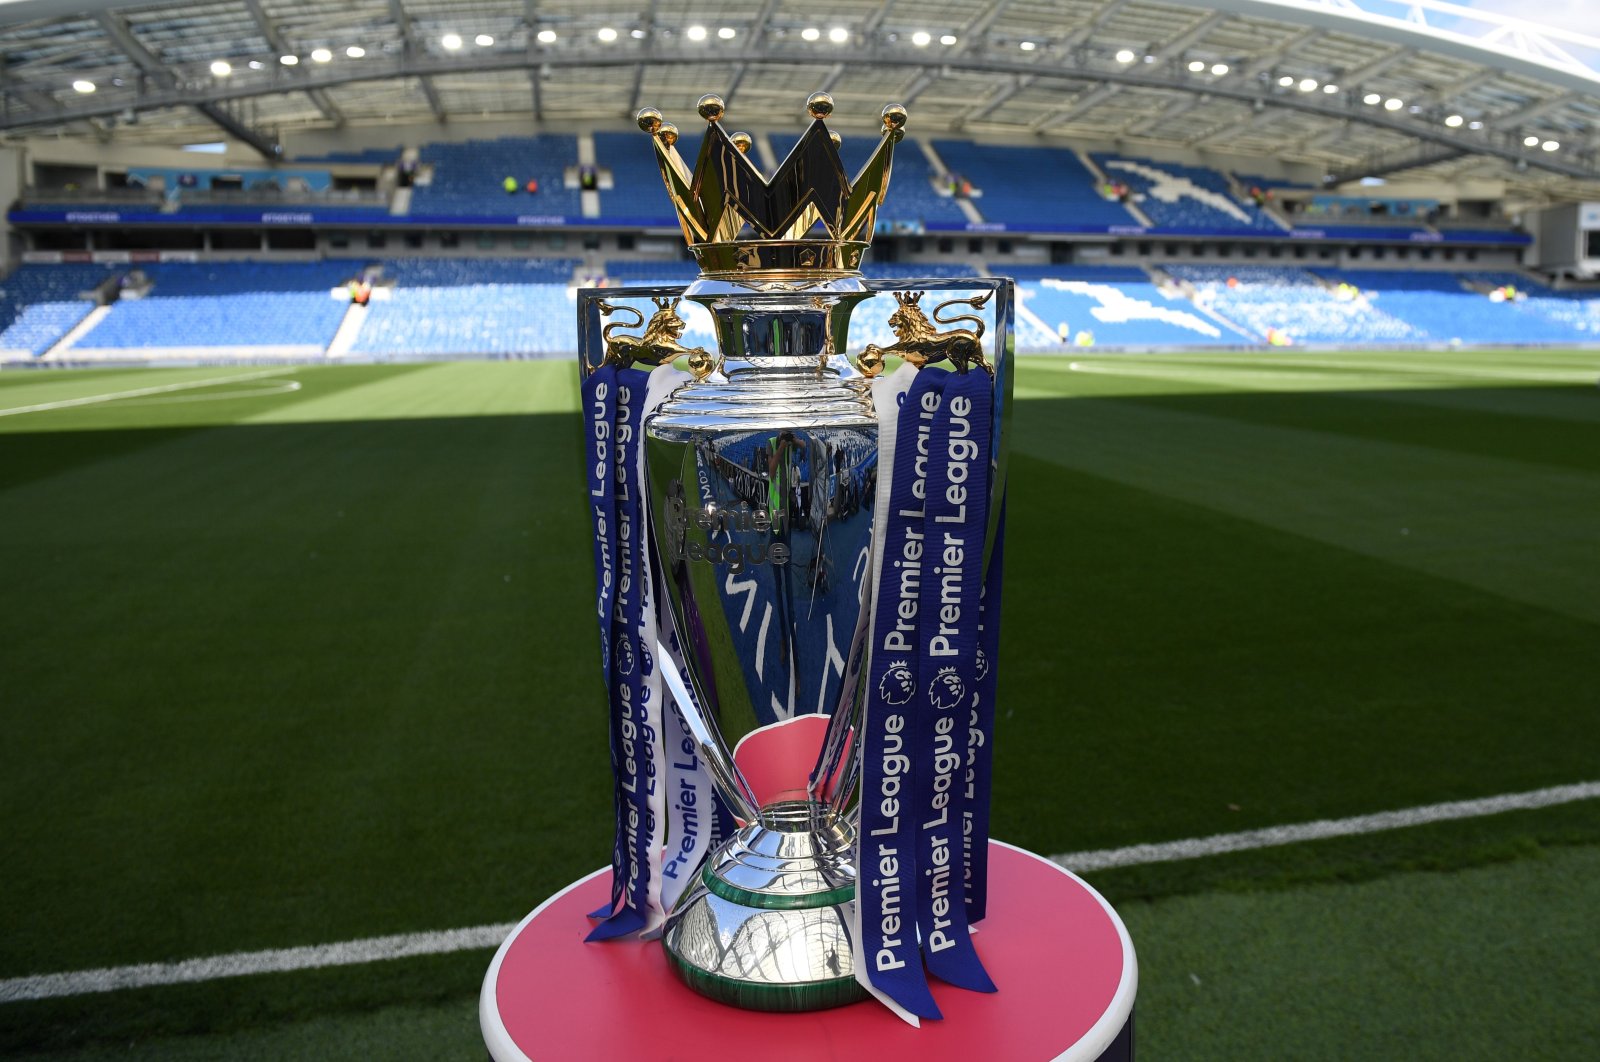 In this file photo taken on August 12, 2017, The Premier League trophy sits beside the pitch ahead of the English Premier League football match between Brighton and Hove Albion and Manchester City at the American Express Community Stadium in Brighton. (AFP Photo)